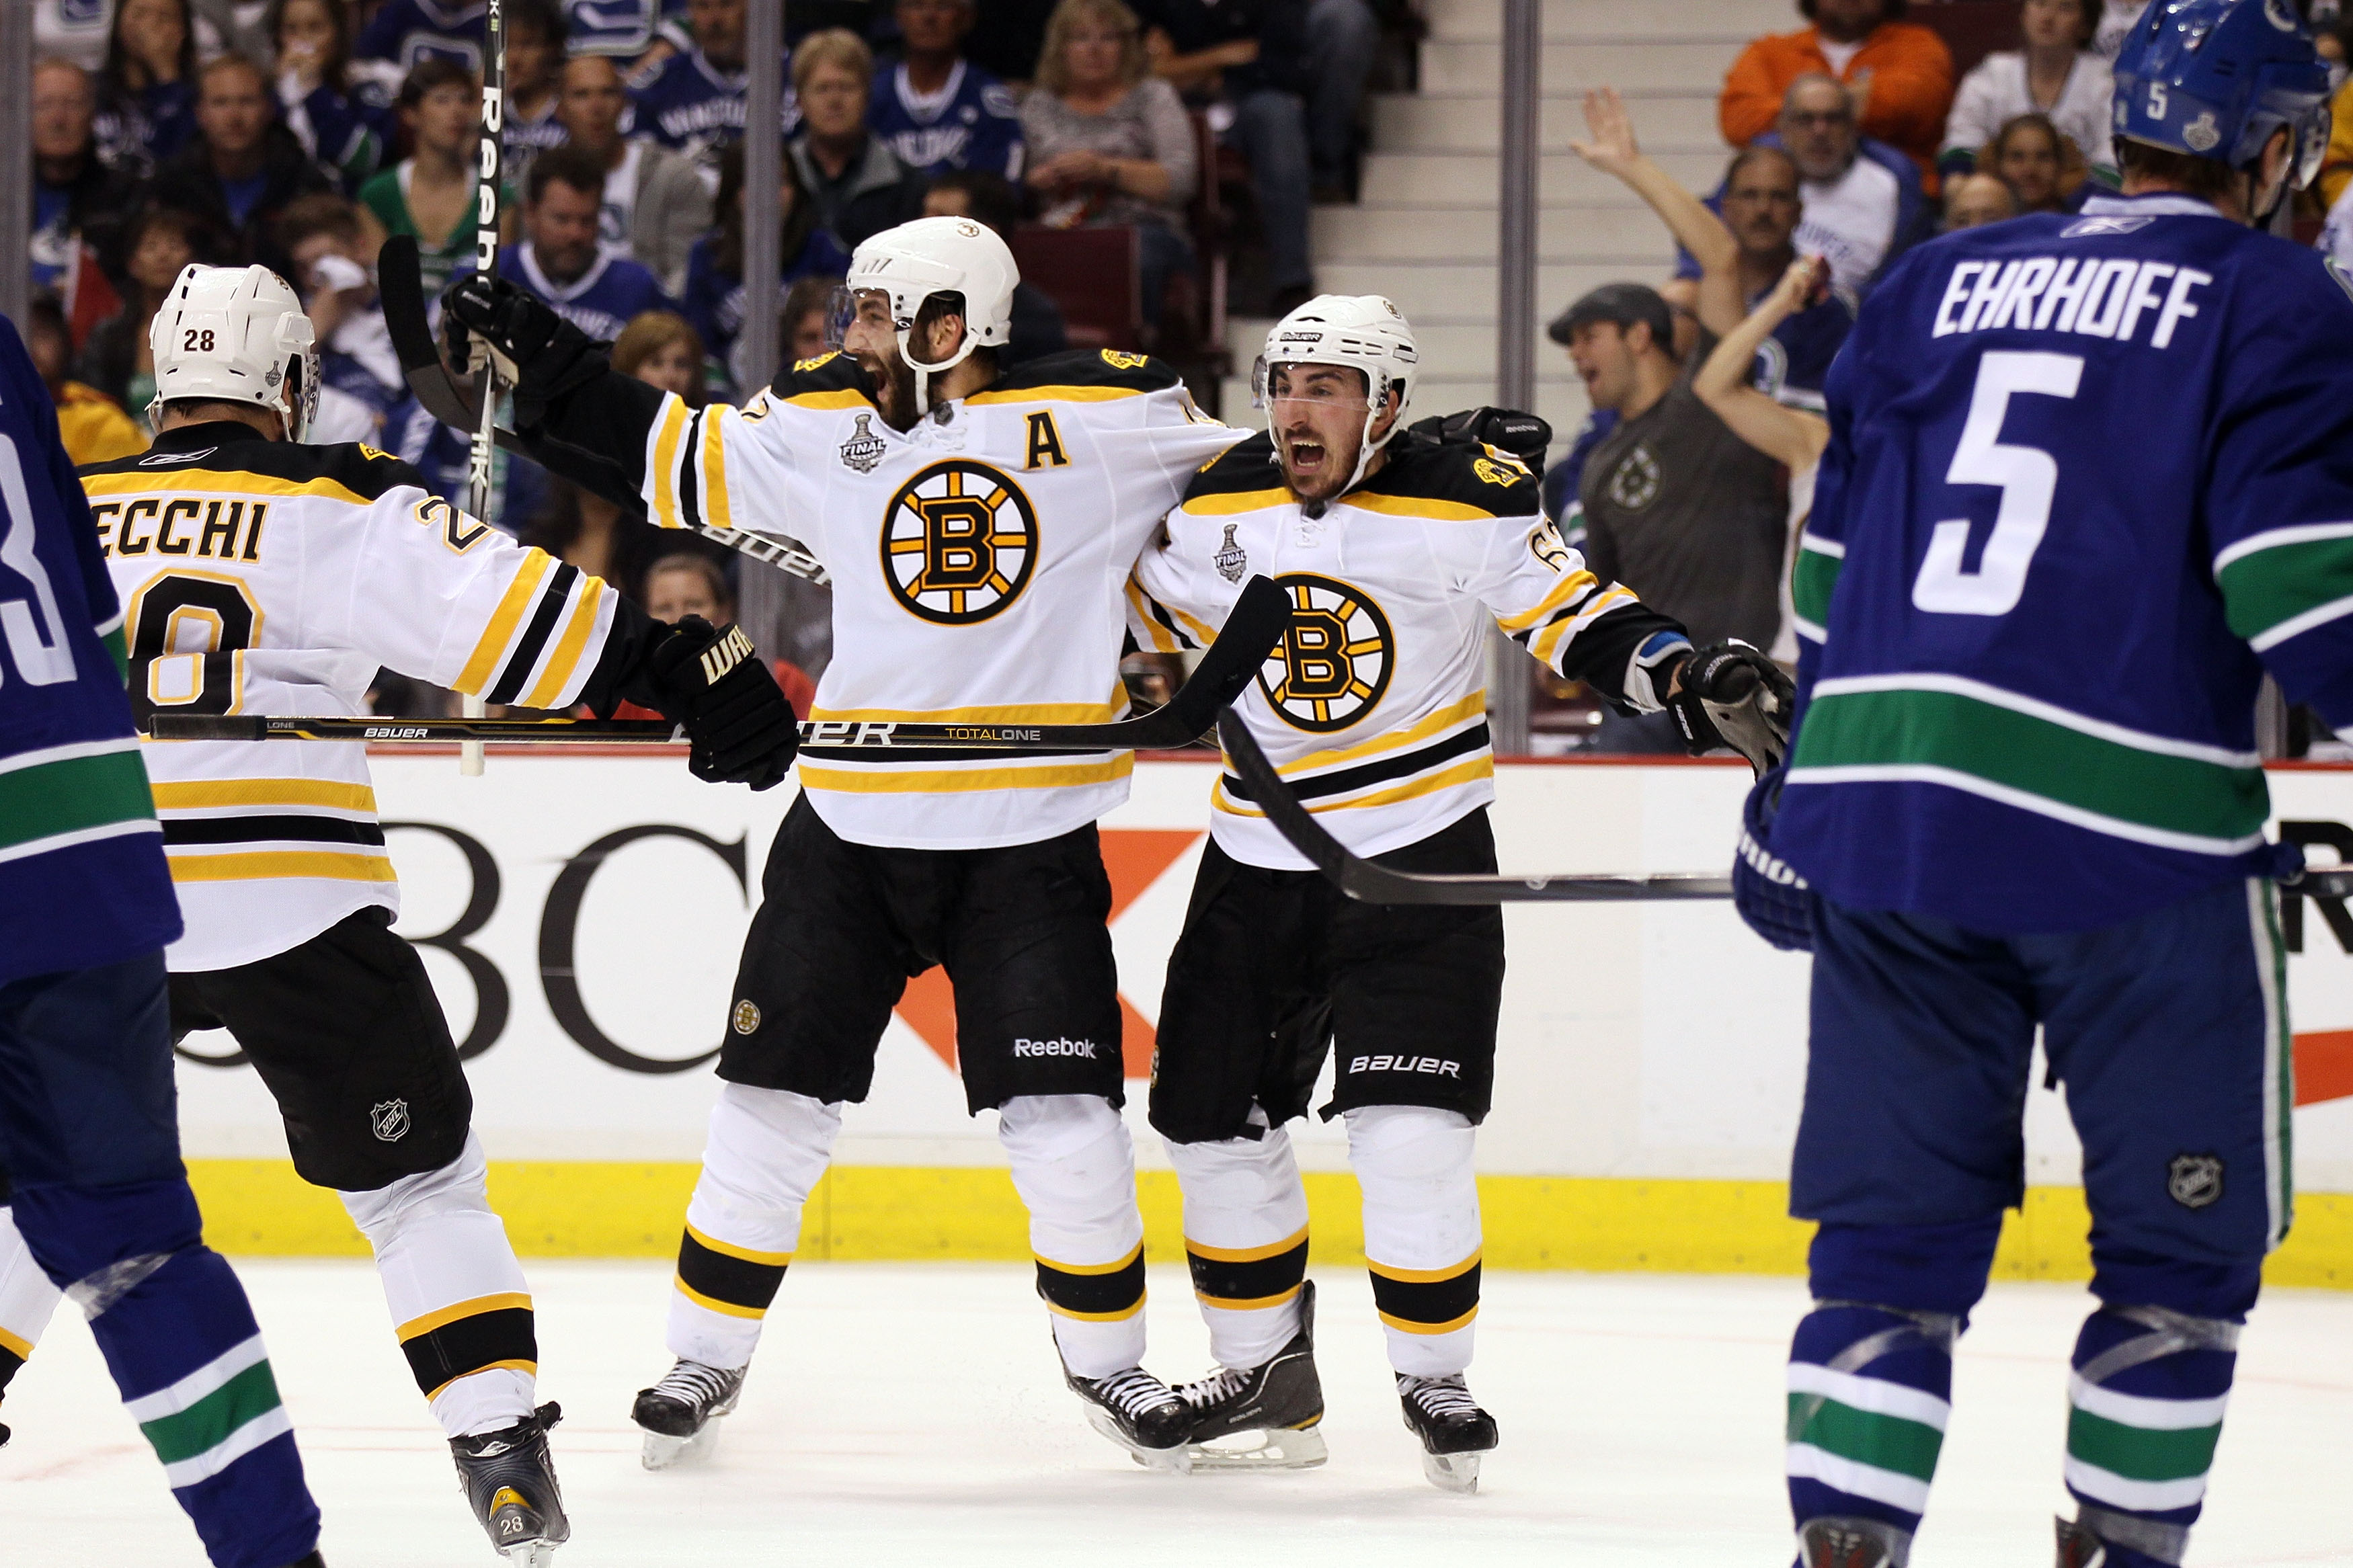 VANCOUVER, BC - JUNE 15:  Patrice Bergeron #37 of the Boston Bruins celebrates with his teammates Mark Recchi #28 and Brad Marchand #63 after scoring a goal in the first period against Roberto Luongo #1 of the Vancouver Canucks during Game Seven of the 20